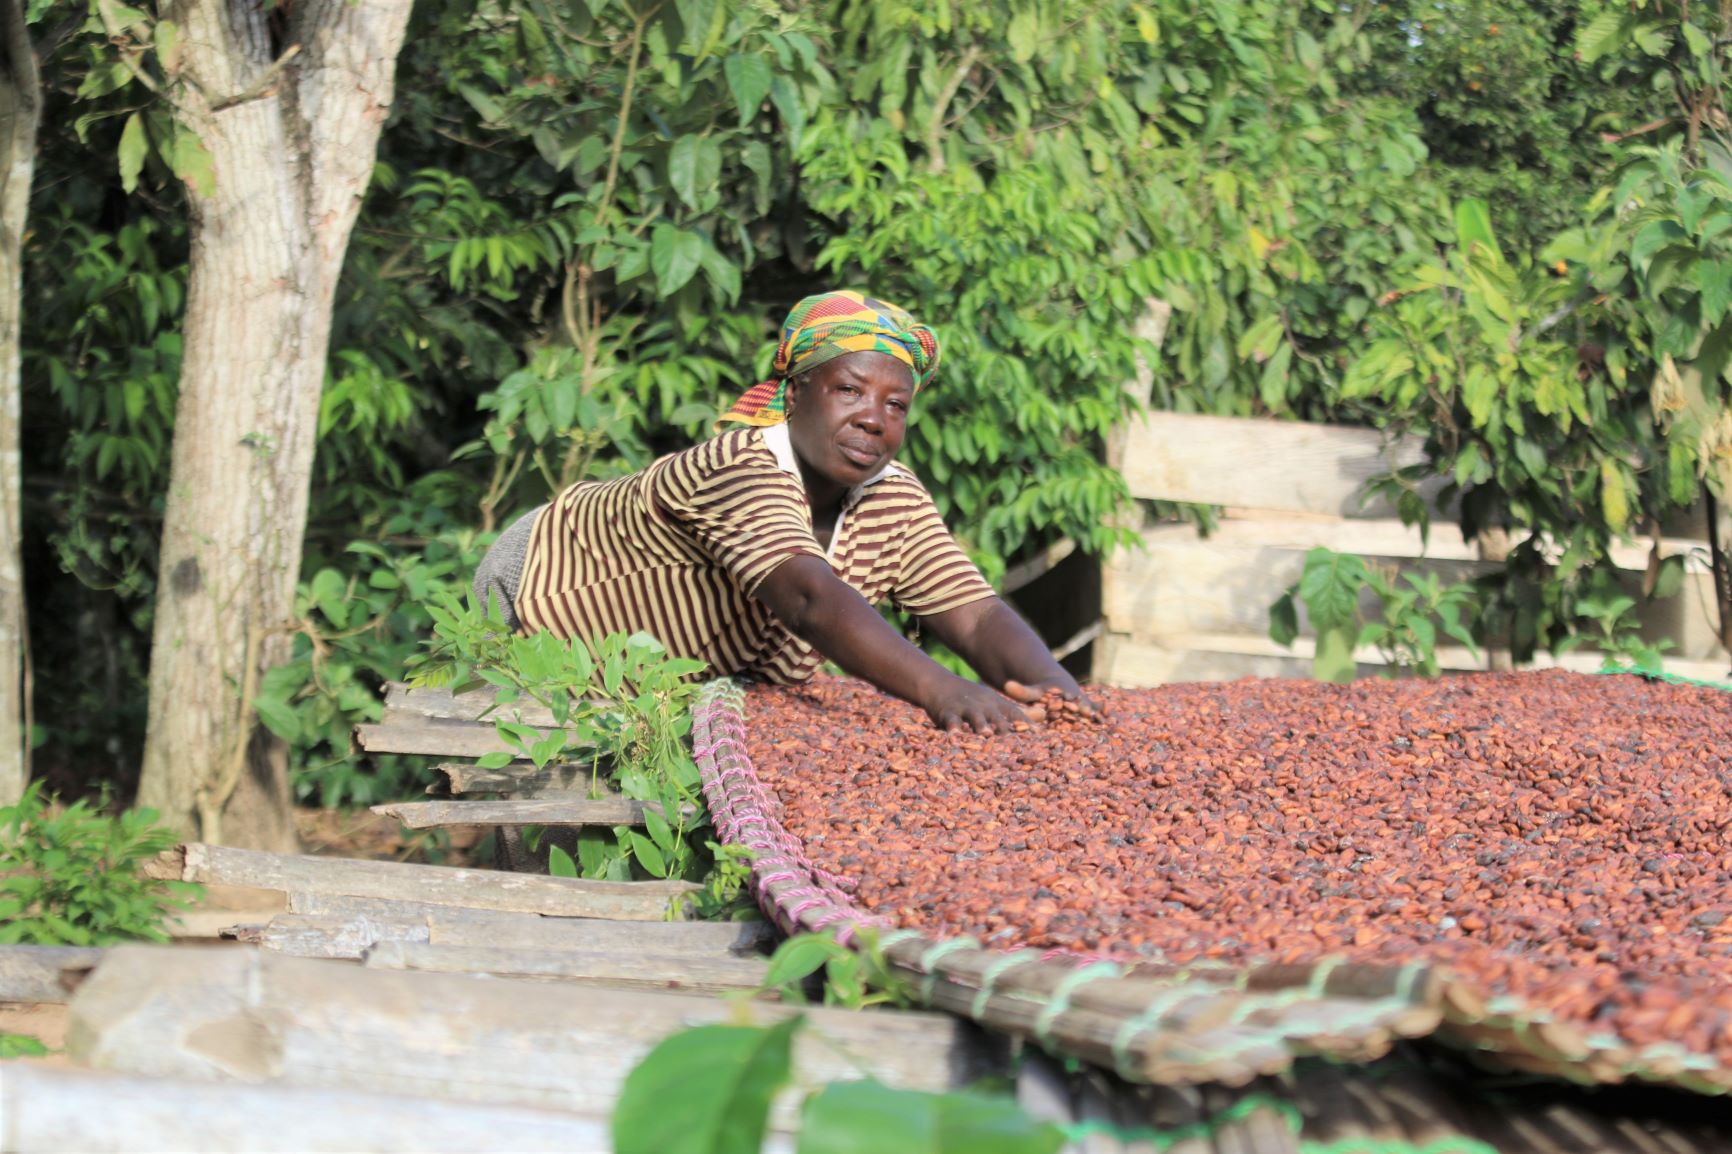 Shading the cocoa trees for people and nature